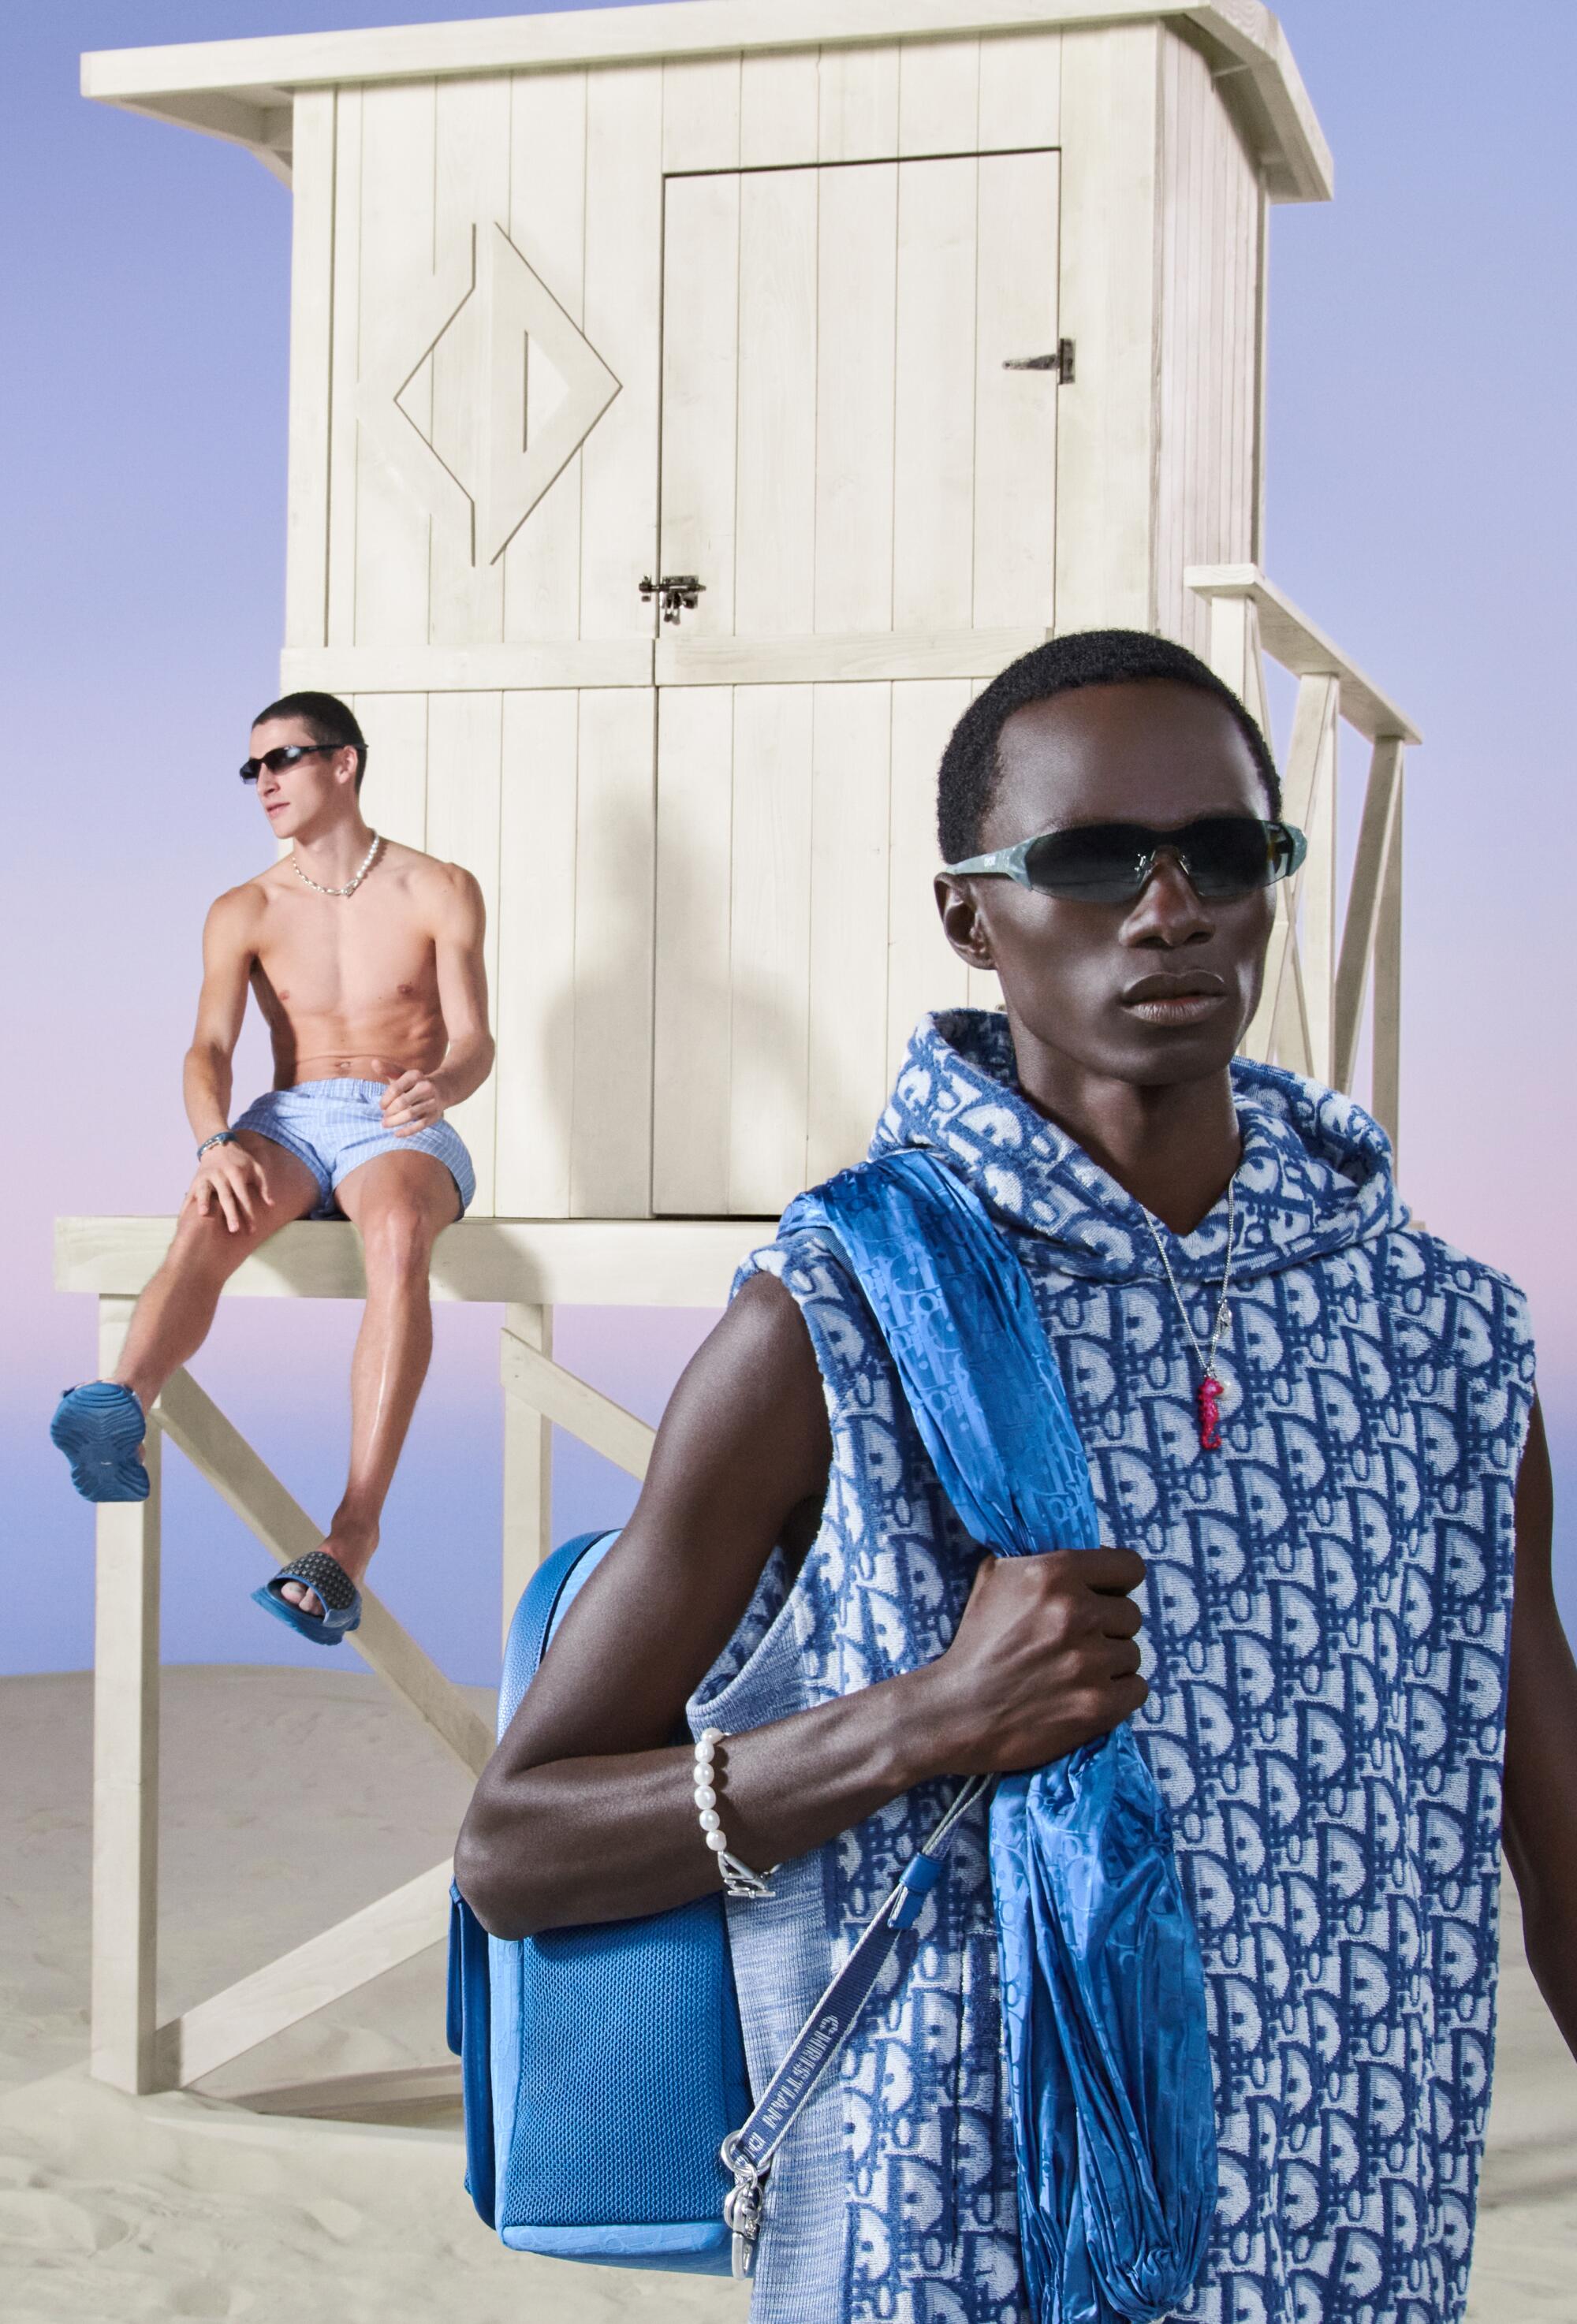 A model in shorts sitting on a lifeguard tower;  in the foreground, a model wearing a blue sleeveless hoodie and a blue towel